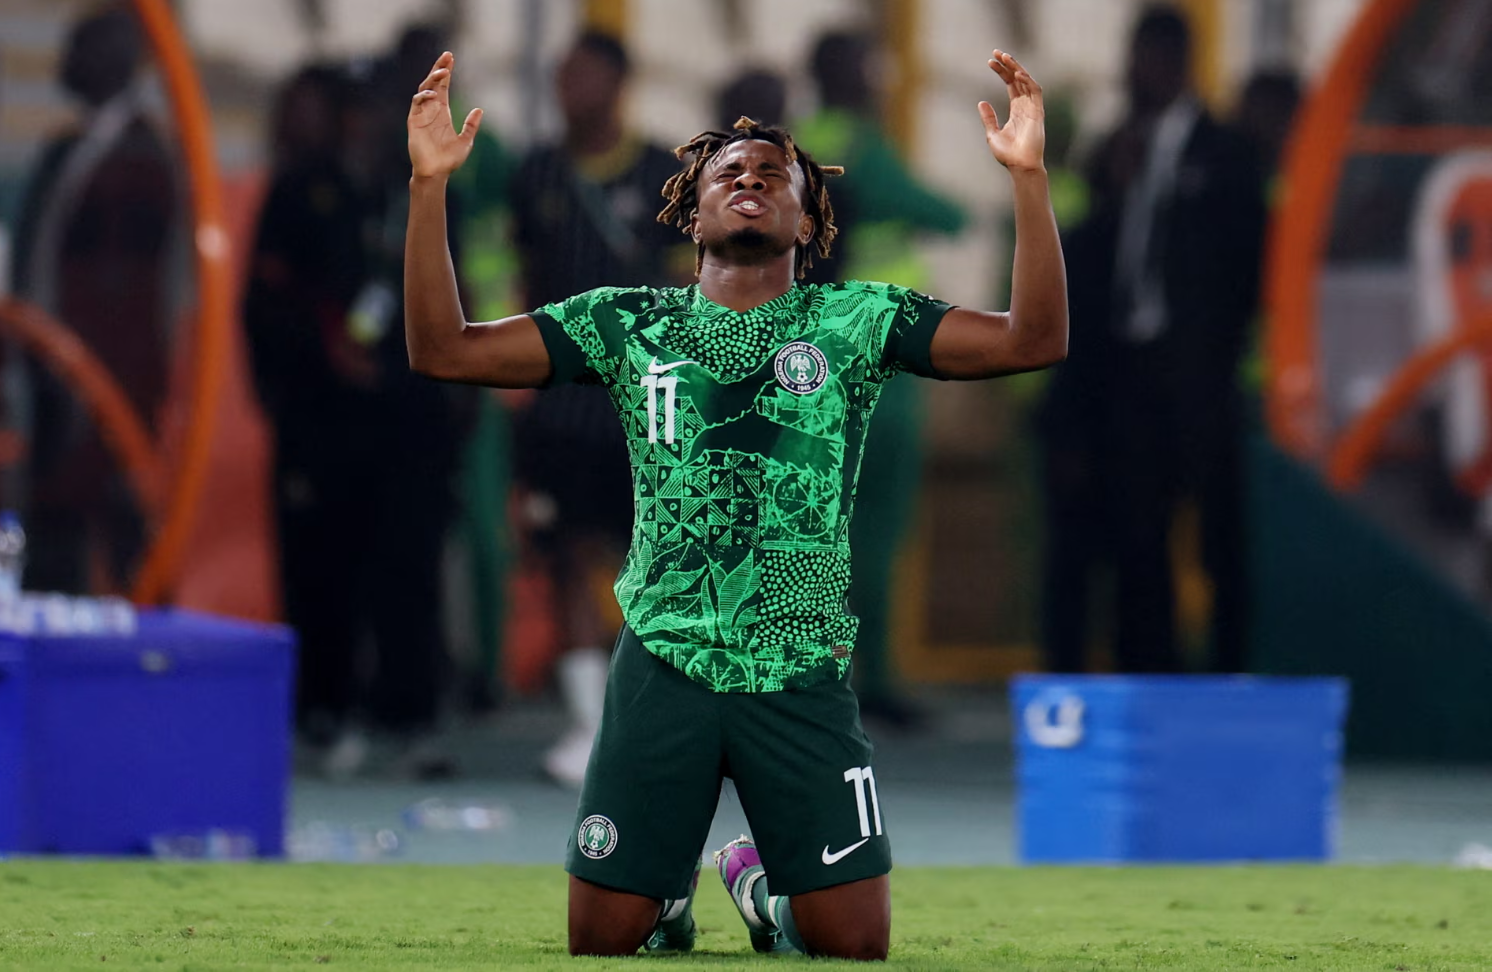 Nigeria’s Samuel Chukwueze reacts after reaching the Africa Cup of Nations final. Photograph: Siphiwe Sibeko/Reuters